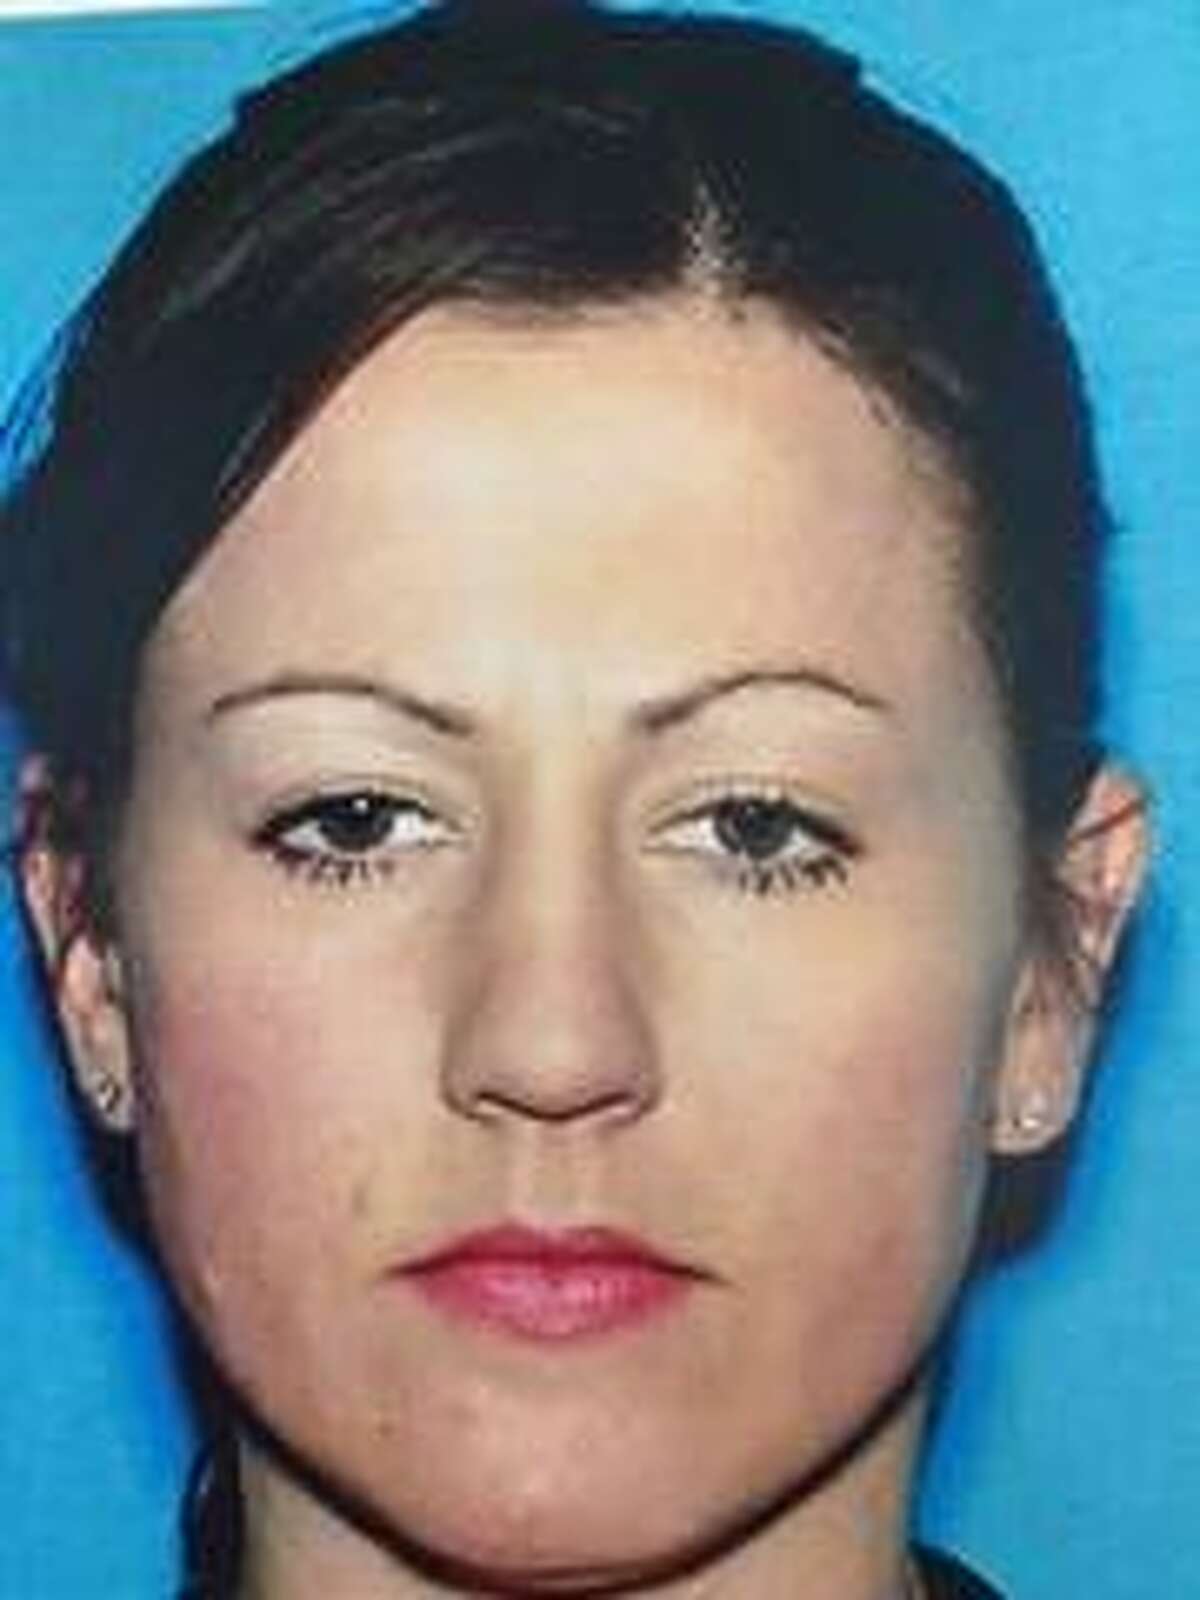 Jasmine Mitchell, daughter of slain San Francisco porn tycoon Artie Mitchell, was sentenced to 27 months in prison for identity theft and credit card fraud in a San Francisco federal court, Oct. 15, 2014.